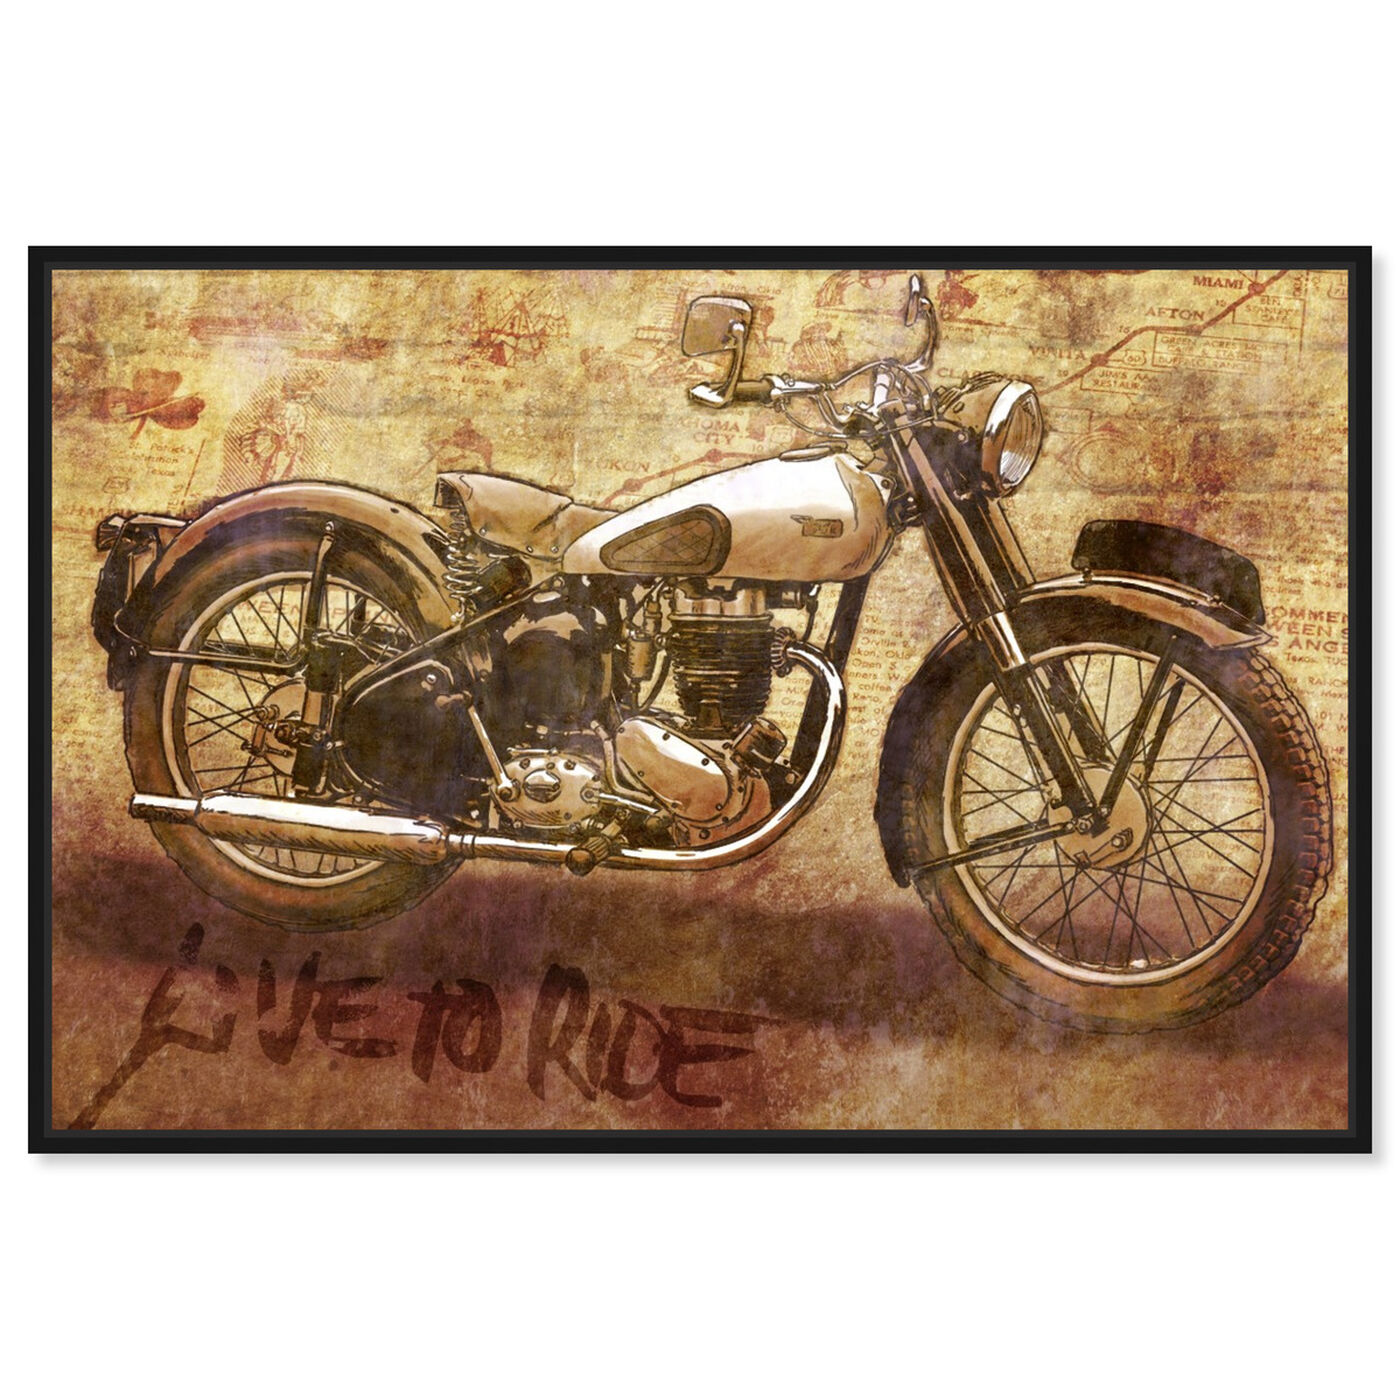 Front view of Live to Ride featuring transportation and motorcycles art.